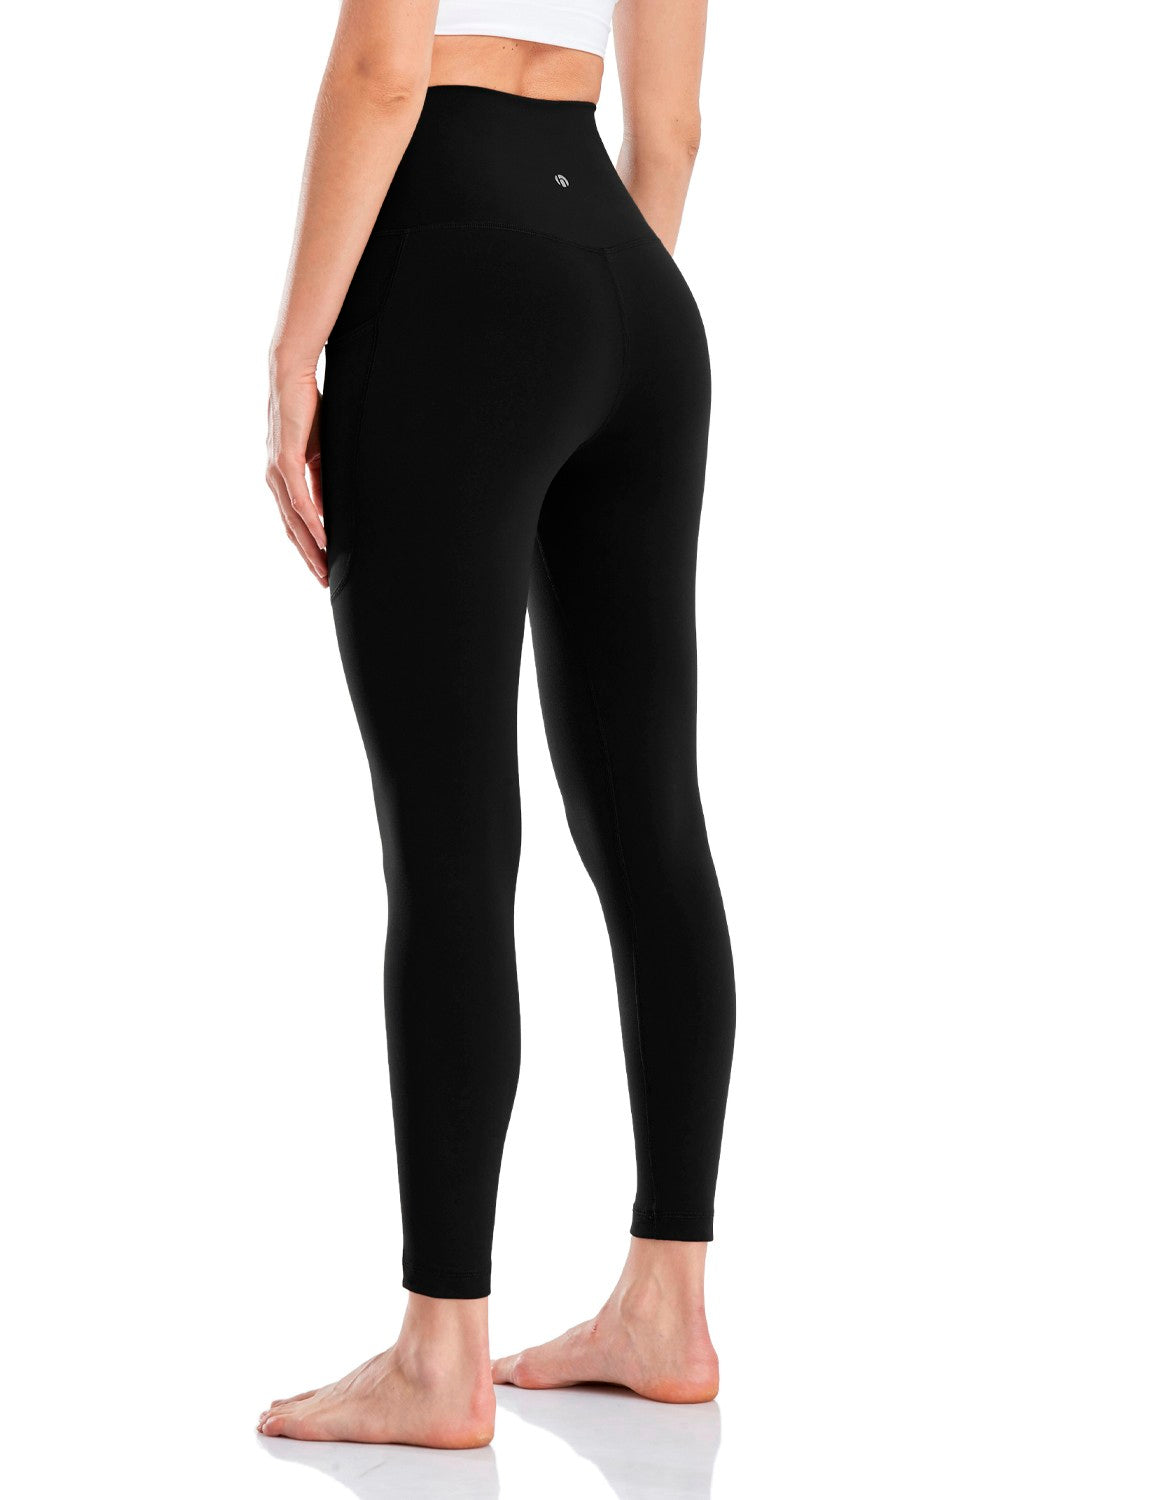  HeyNuts Leggings with Pockets for Women, High Waisted 7/8  Leggings Tummy Control Compression Workout Buttery Soft Pants 25'' Black  XXS(00) : Clothing, Shoes & Jewelry